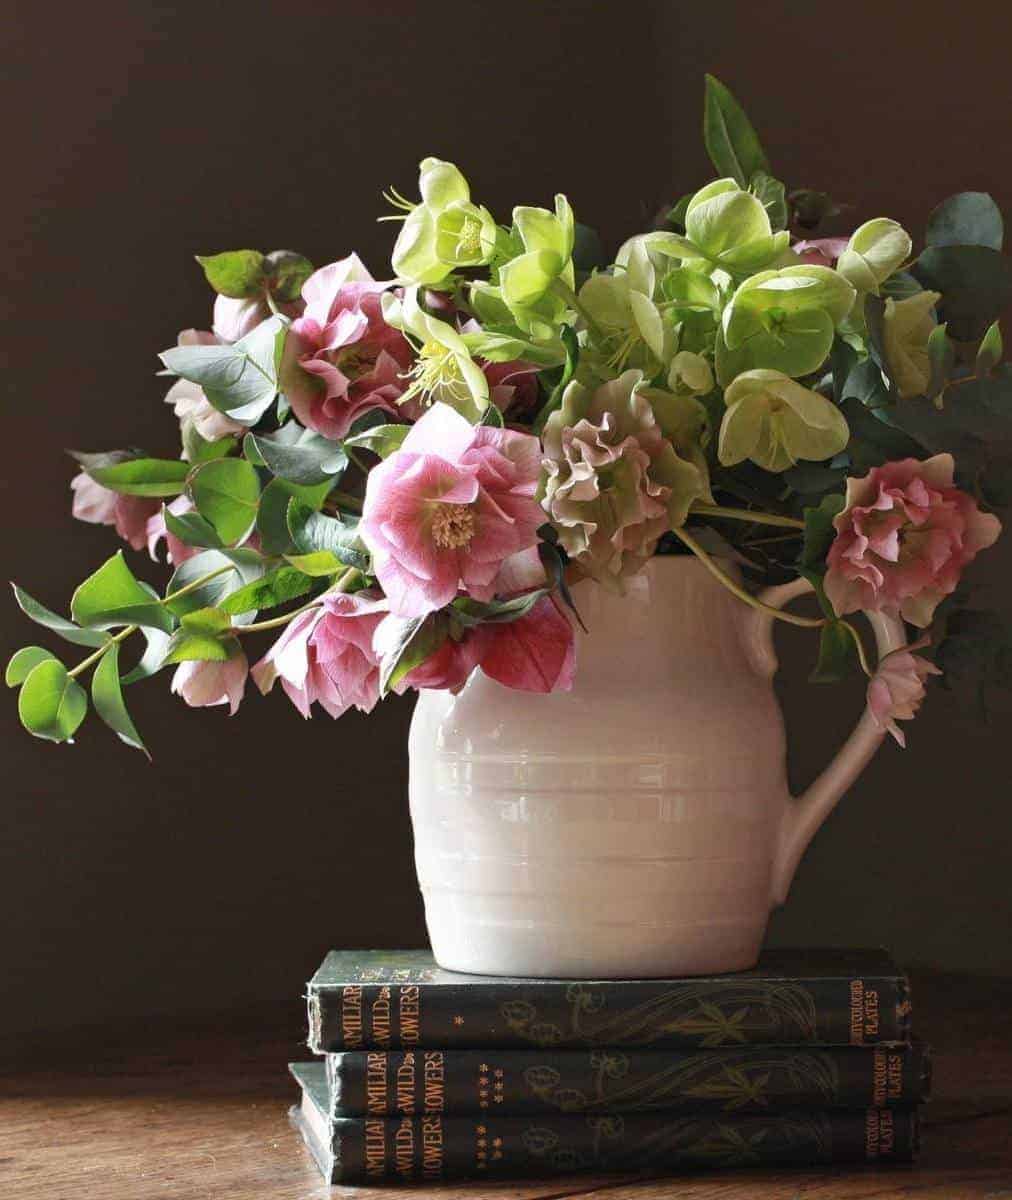 love these blush pink and lime green hellebores in a white creamware jug. by The Real Flower company - scented paperwhite narcissi, yellow rununculus and daffodils with fresh spring green eucaluptus and aromatic fresh mint. Click through for more beautiful spring flower arrangement ideas you'll love 